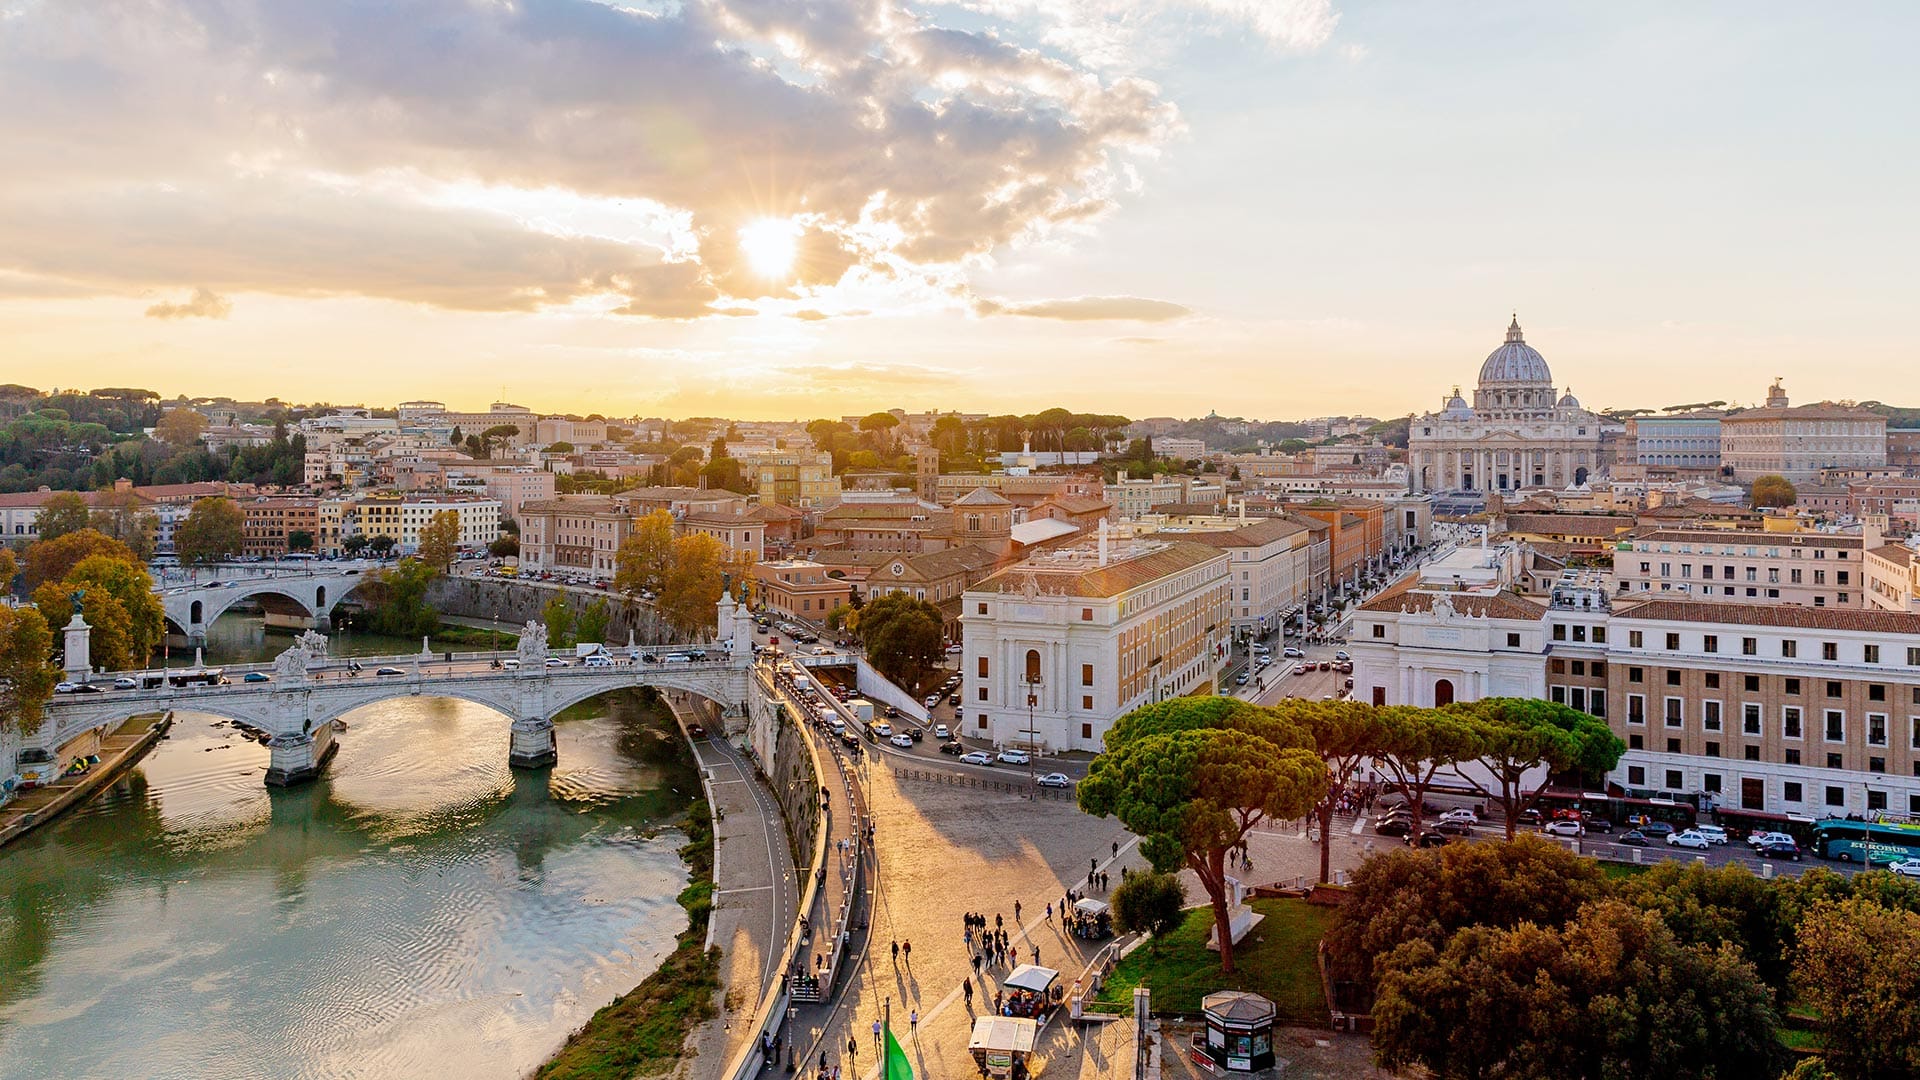 Enjoy 3 Days in Rome, Italy, from the Ancient Ruins to the Hippest Haunts